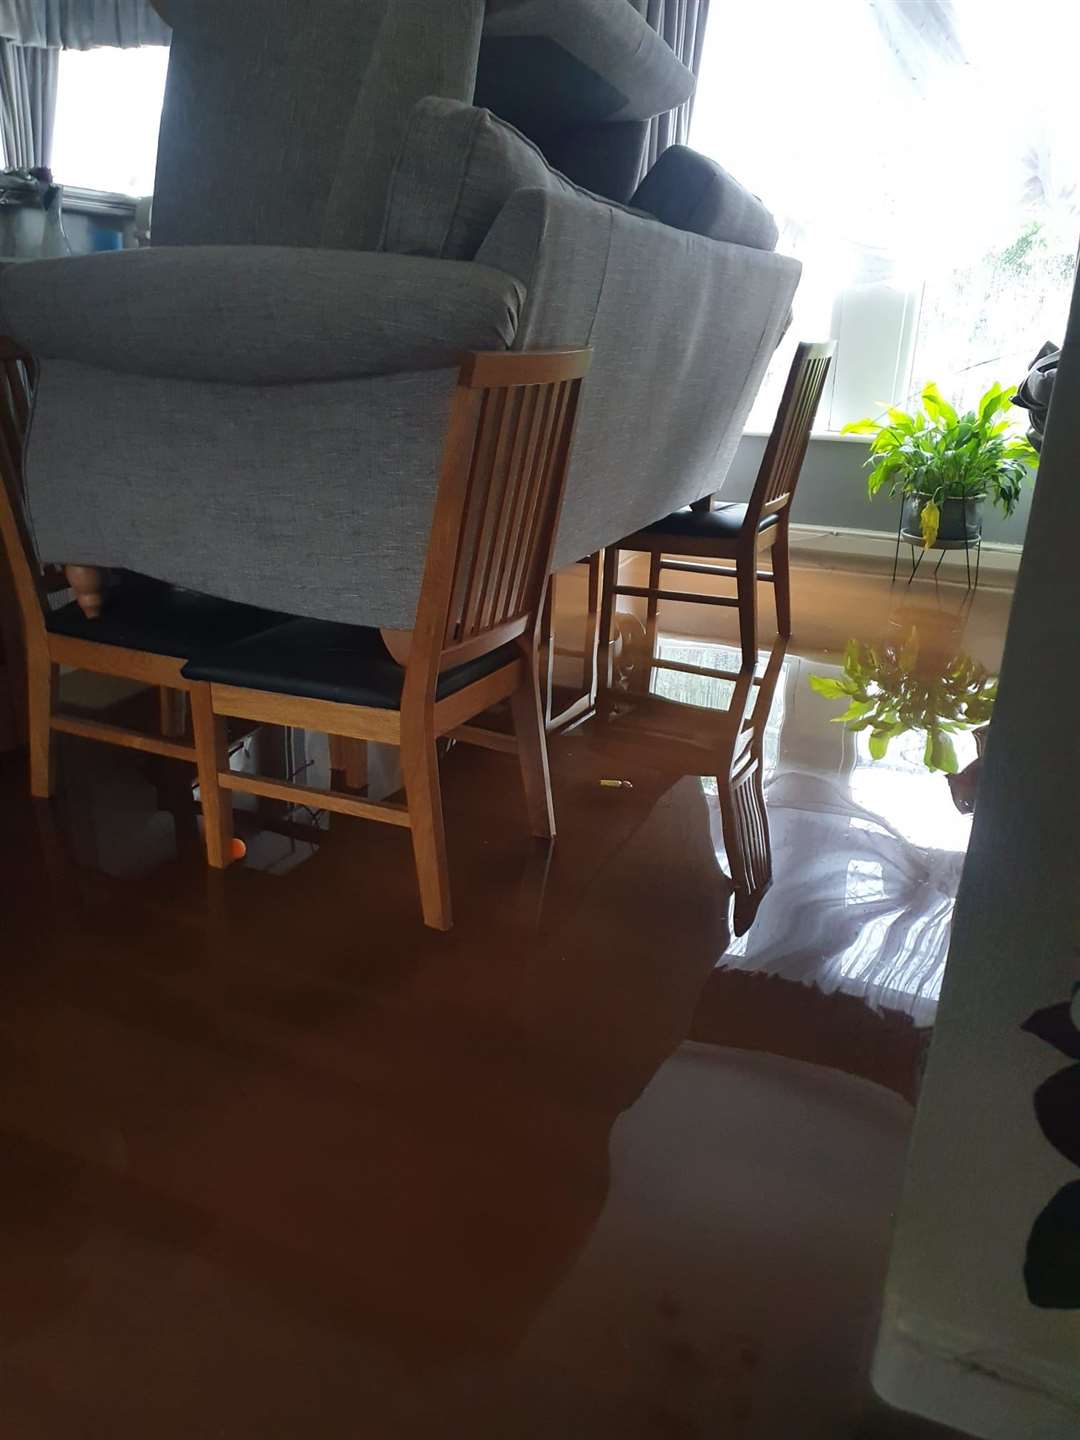 The family placed the sofa on four dining room chairs to keep it safe from the water (Nicola Thorogood)